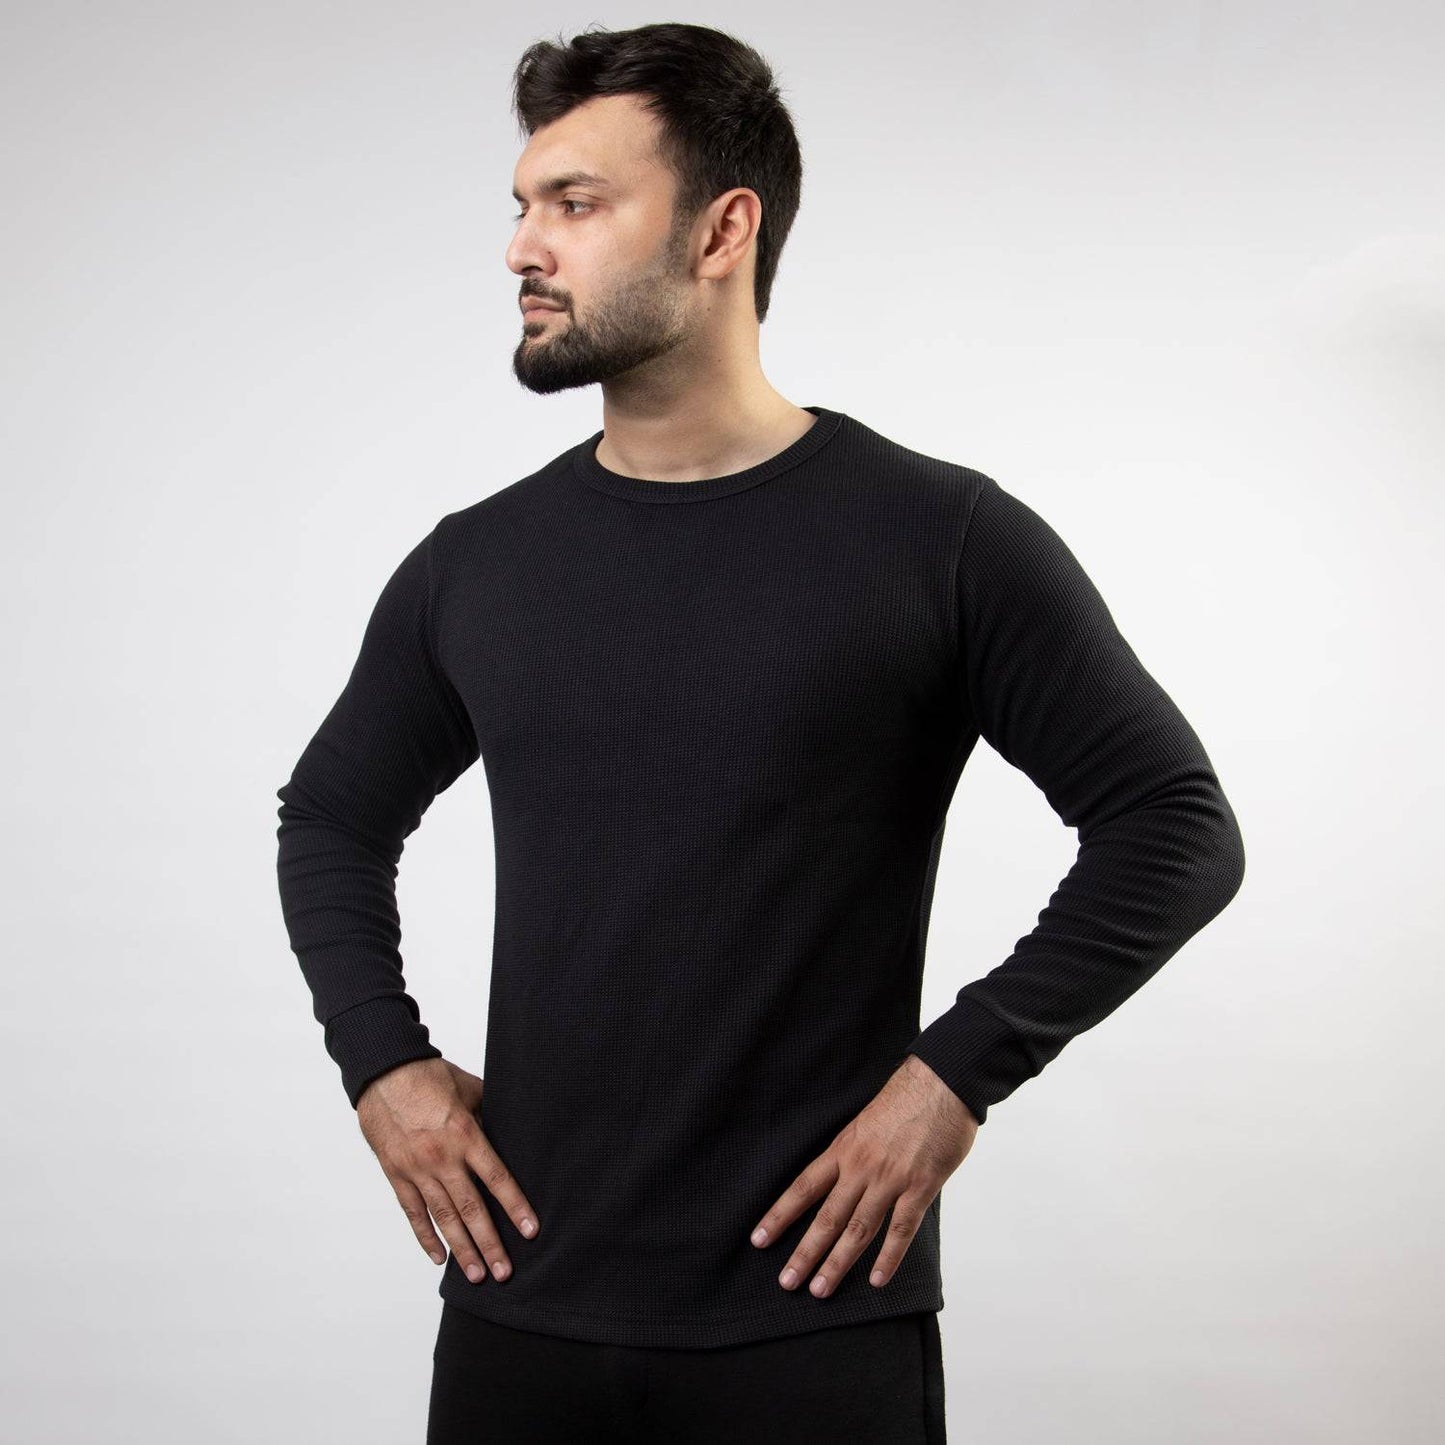 Black Thermal Full Sleeves Waffle-Knit - Valetica Sports